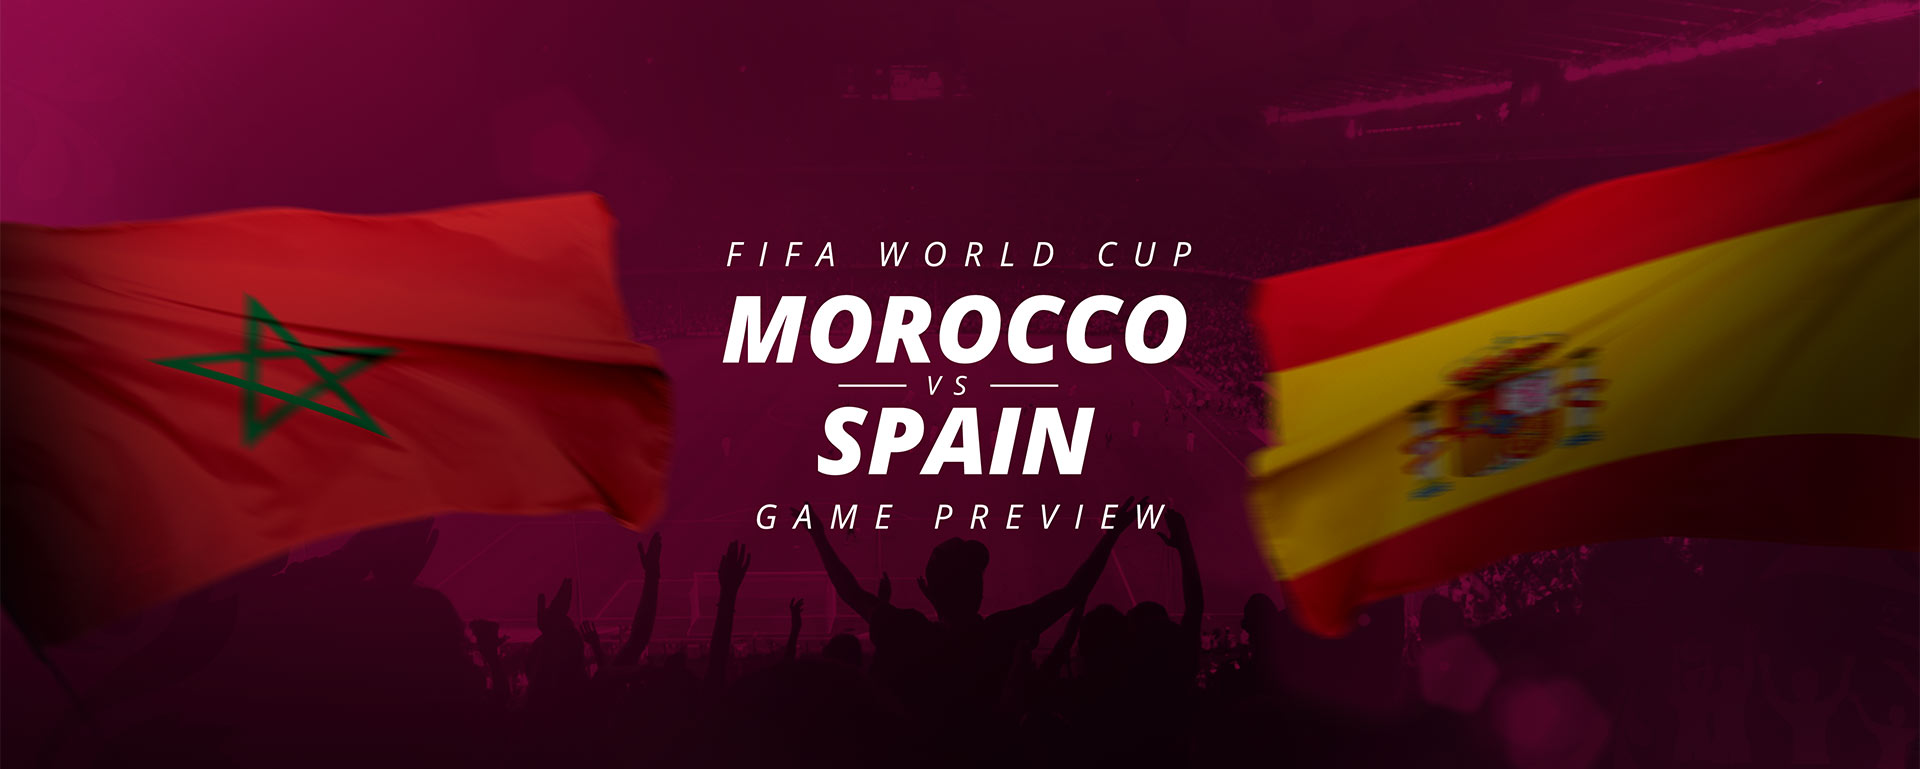 FIFA WORLD CUP: MOROCCO V SPAIN – GAME PREVIEW